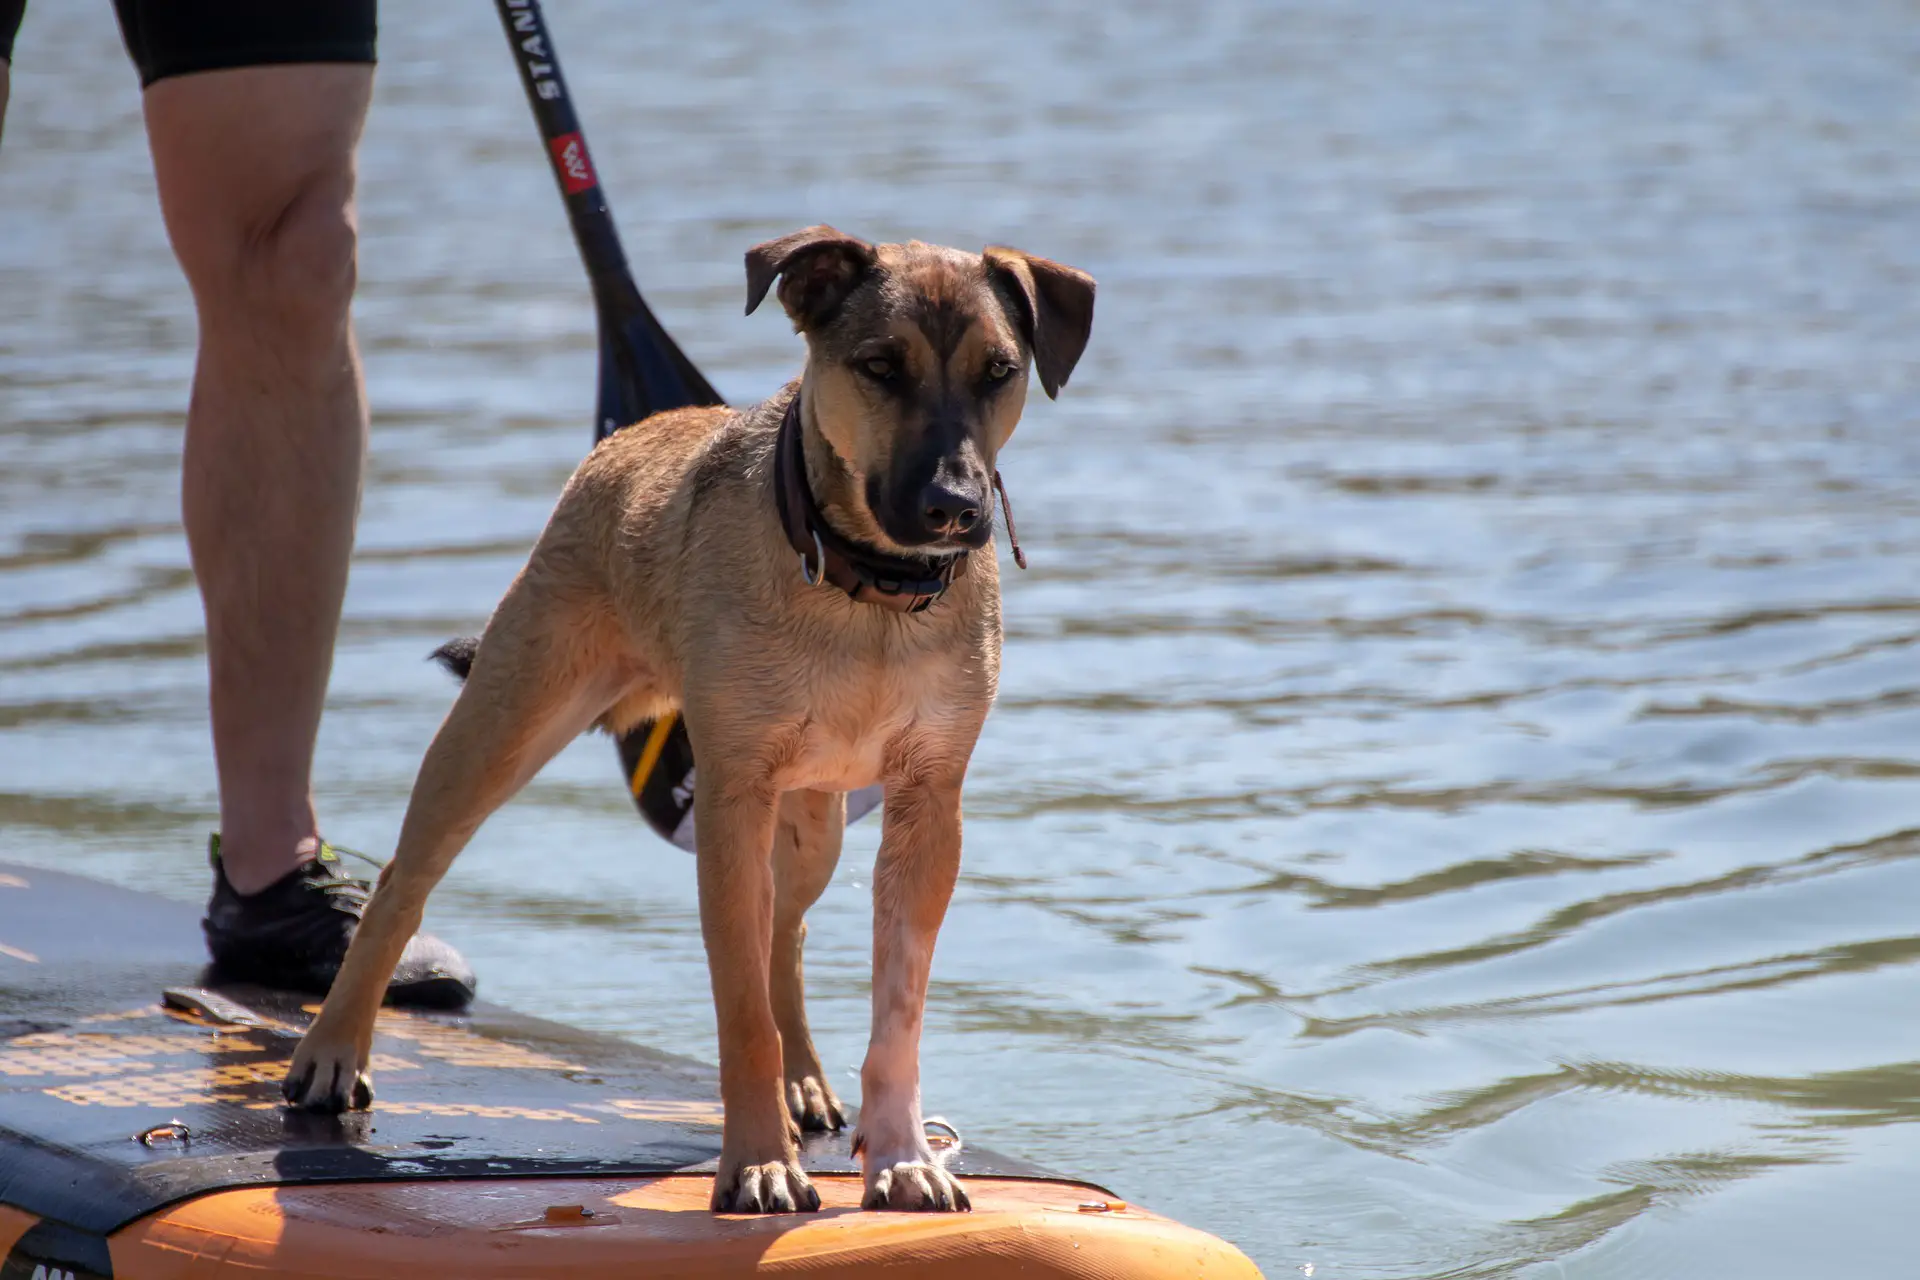 Stand Up Paddle Board with Dog, Dog on a Stand Up Paddle Board